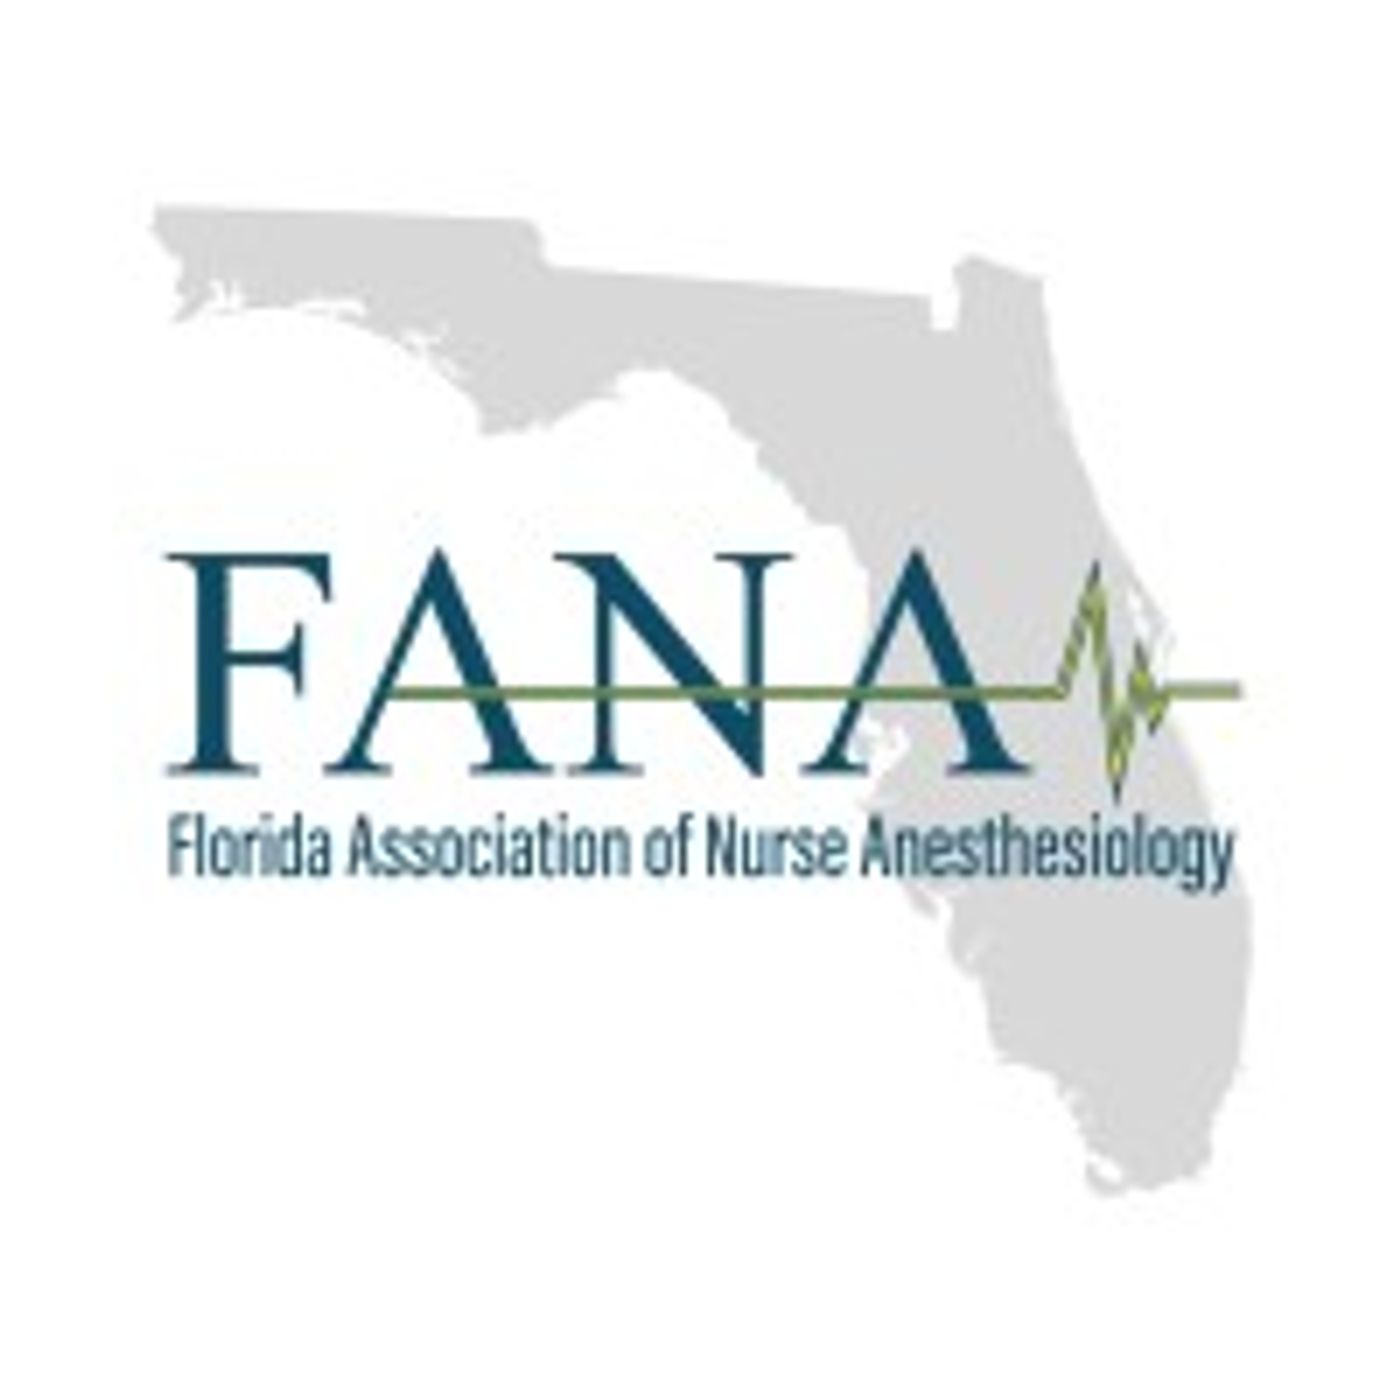 Michelle Canale With Florida Association of Nurse Anesthesiology